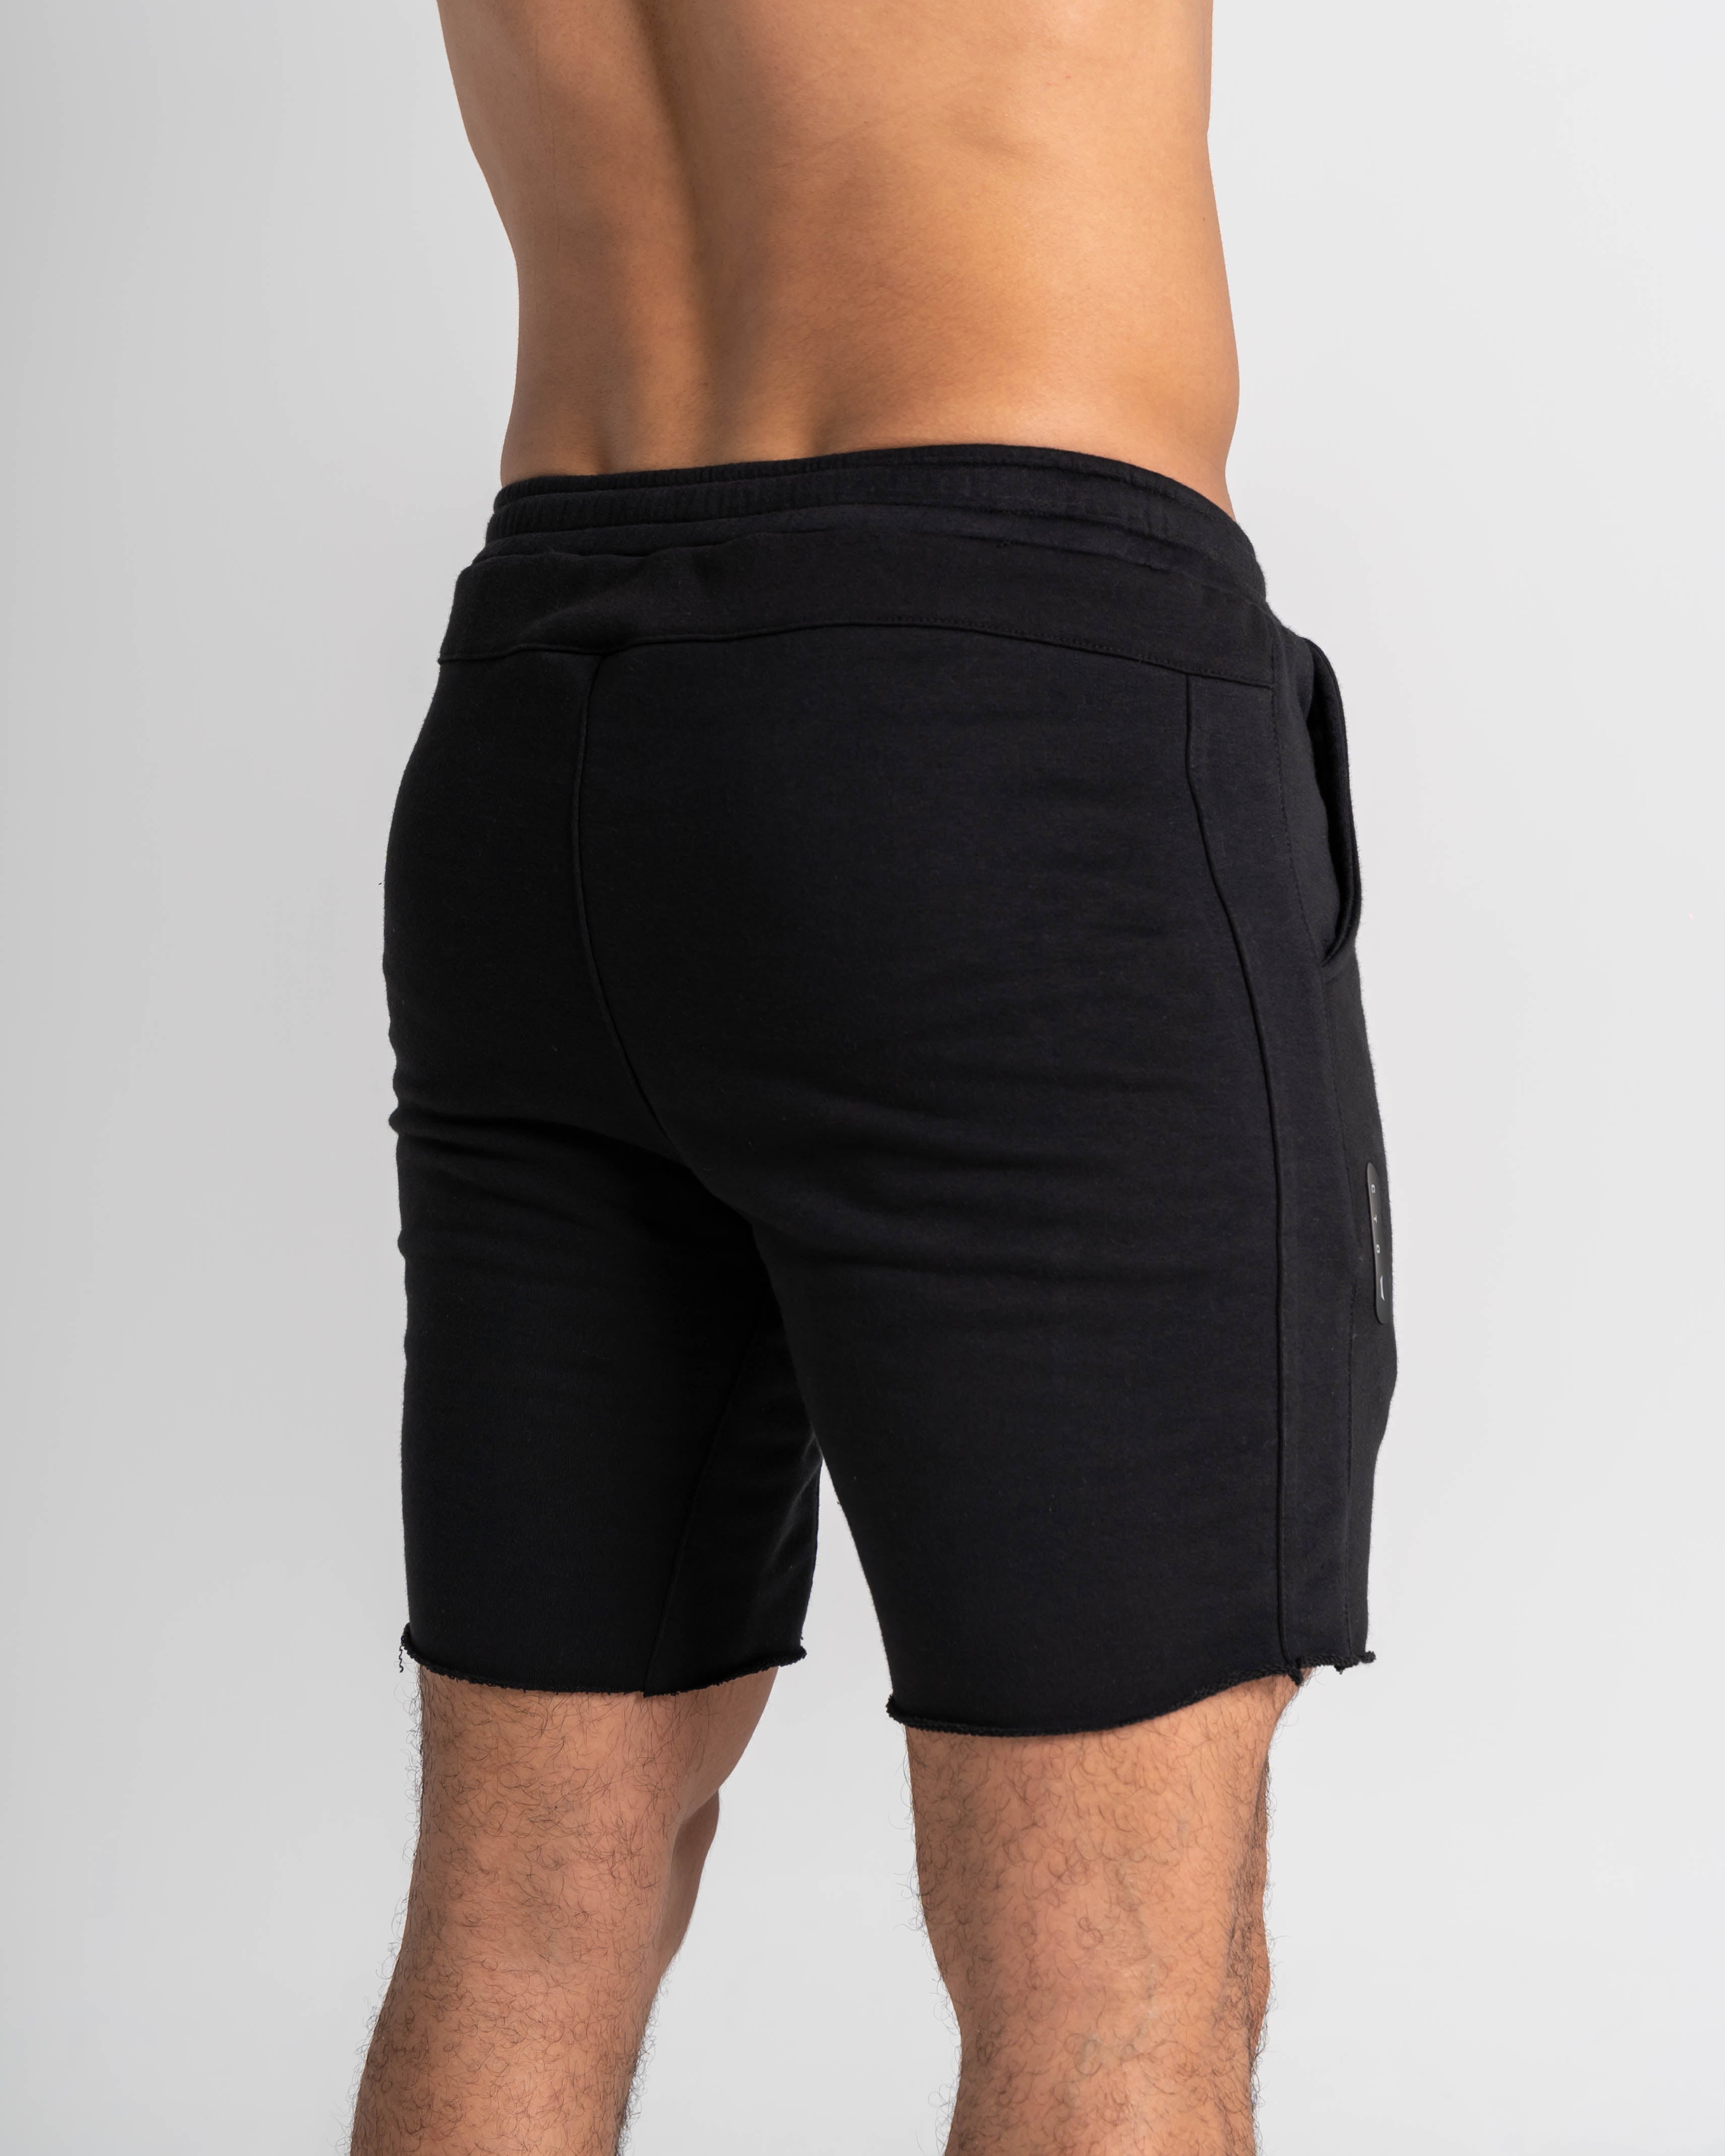 Training Muscle Shorts - Carbon Black